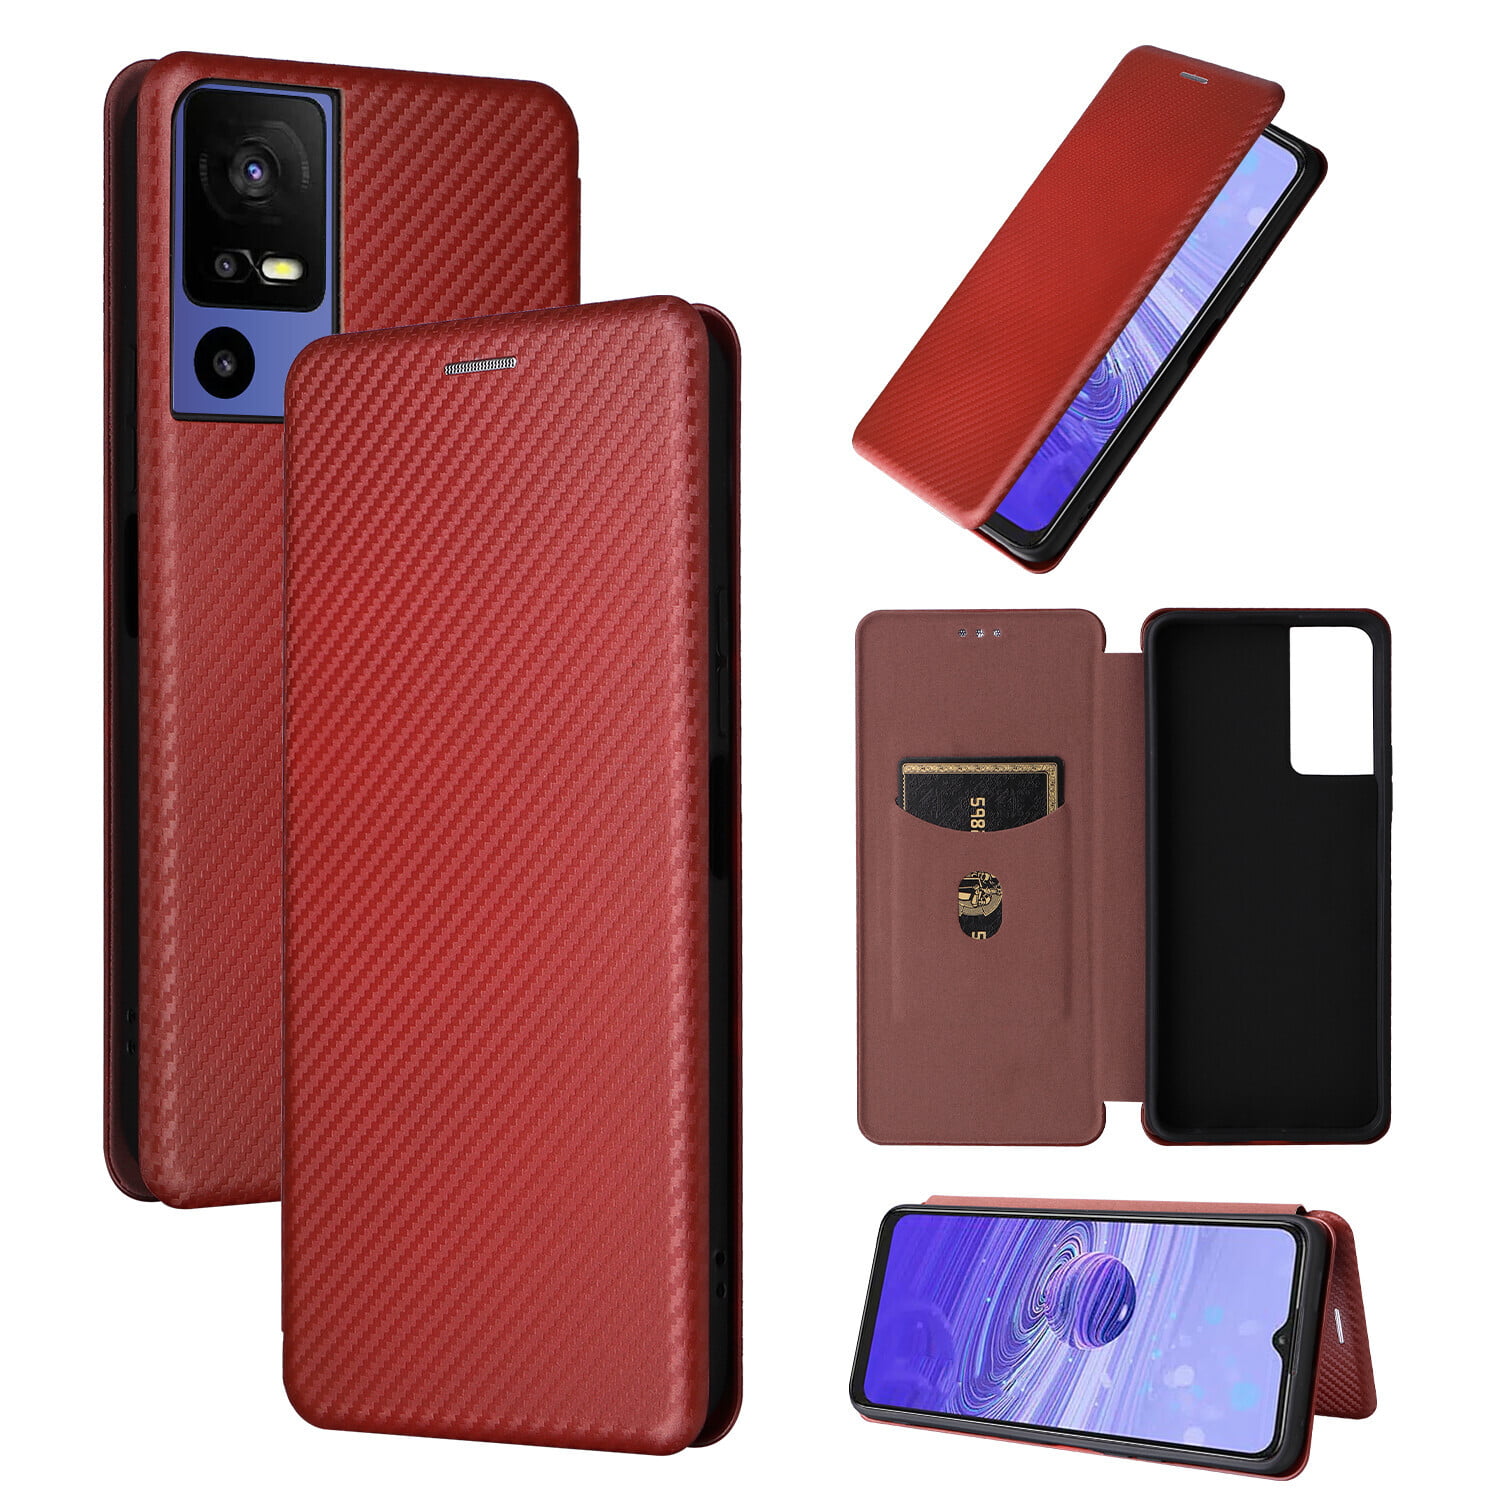 Compatible With Tcl 40 Se Case, Folio Cover Magnetic Wallet Leather Case  For Tcl 40 Se